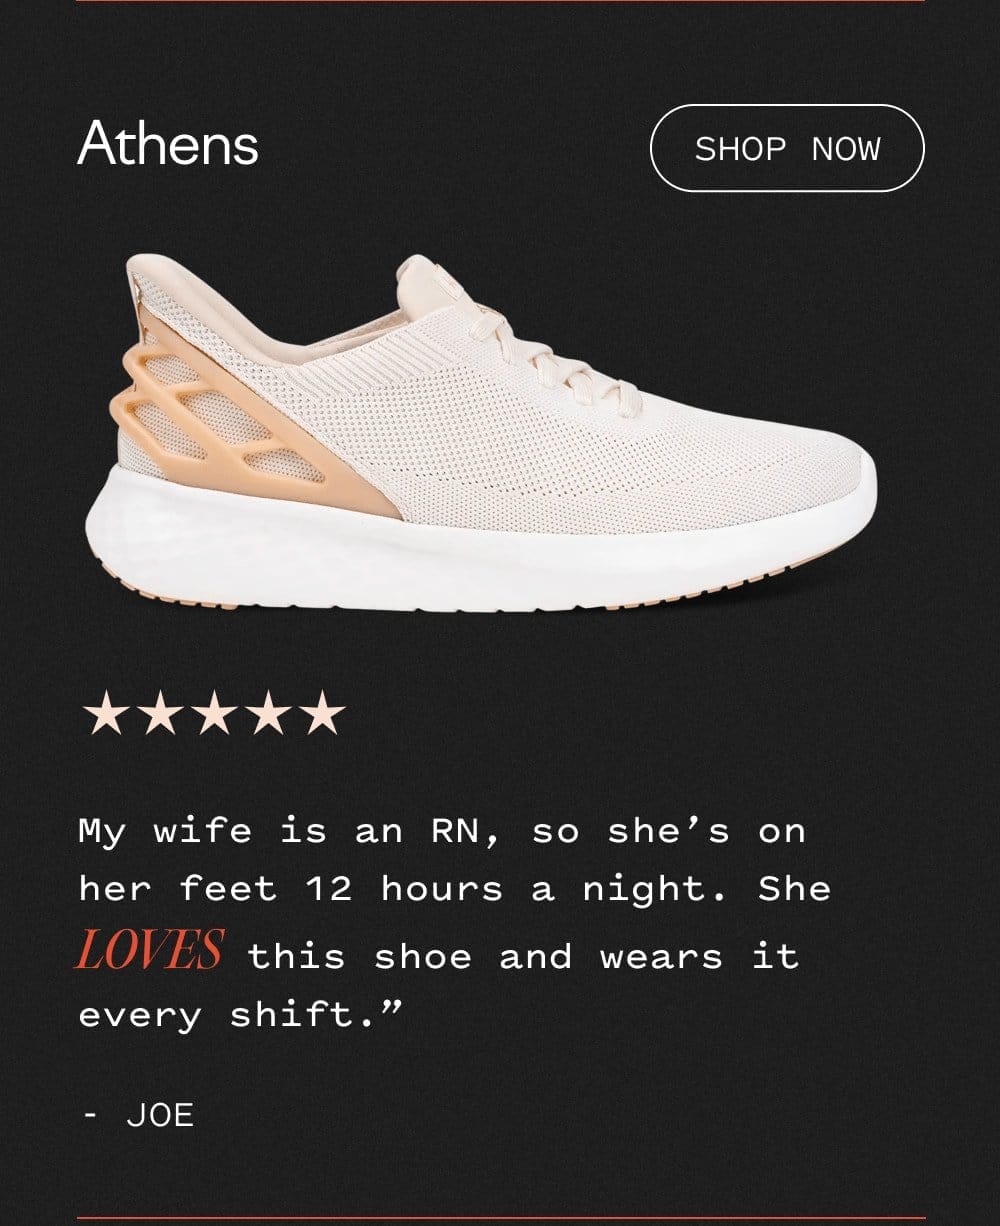 Athens - Shop now. My wife is an RN, so she's on her feet 12 hours a night. She LOVES this shoe and wears it every shift. 